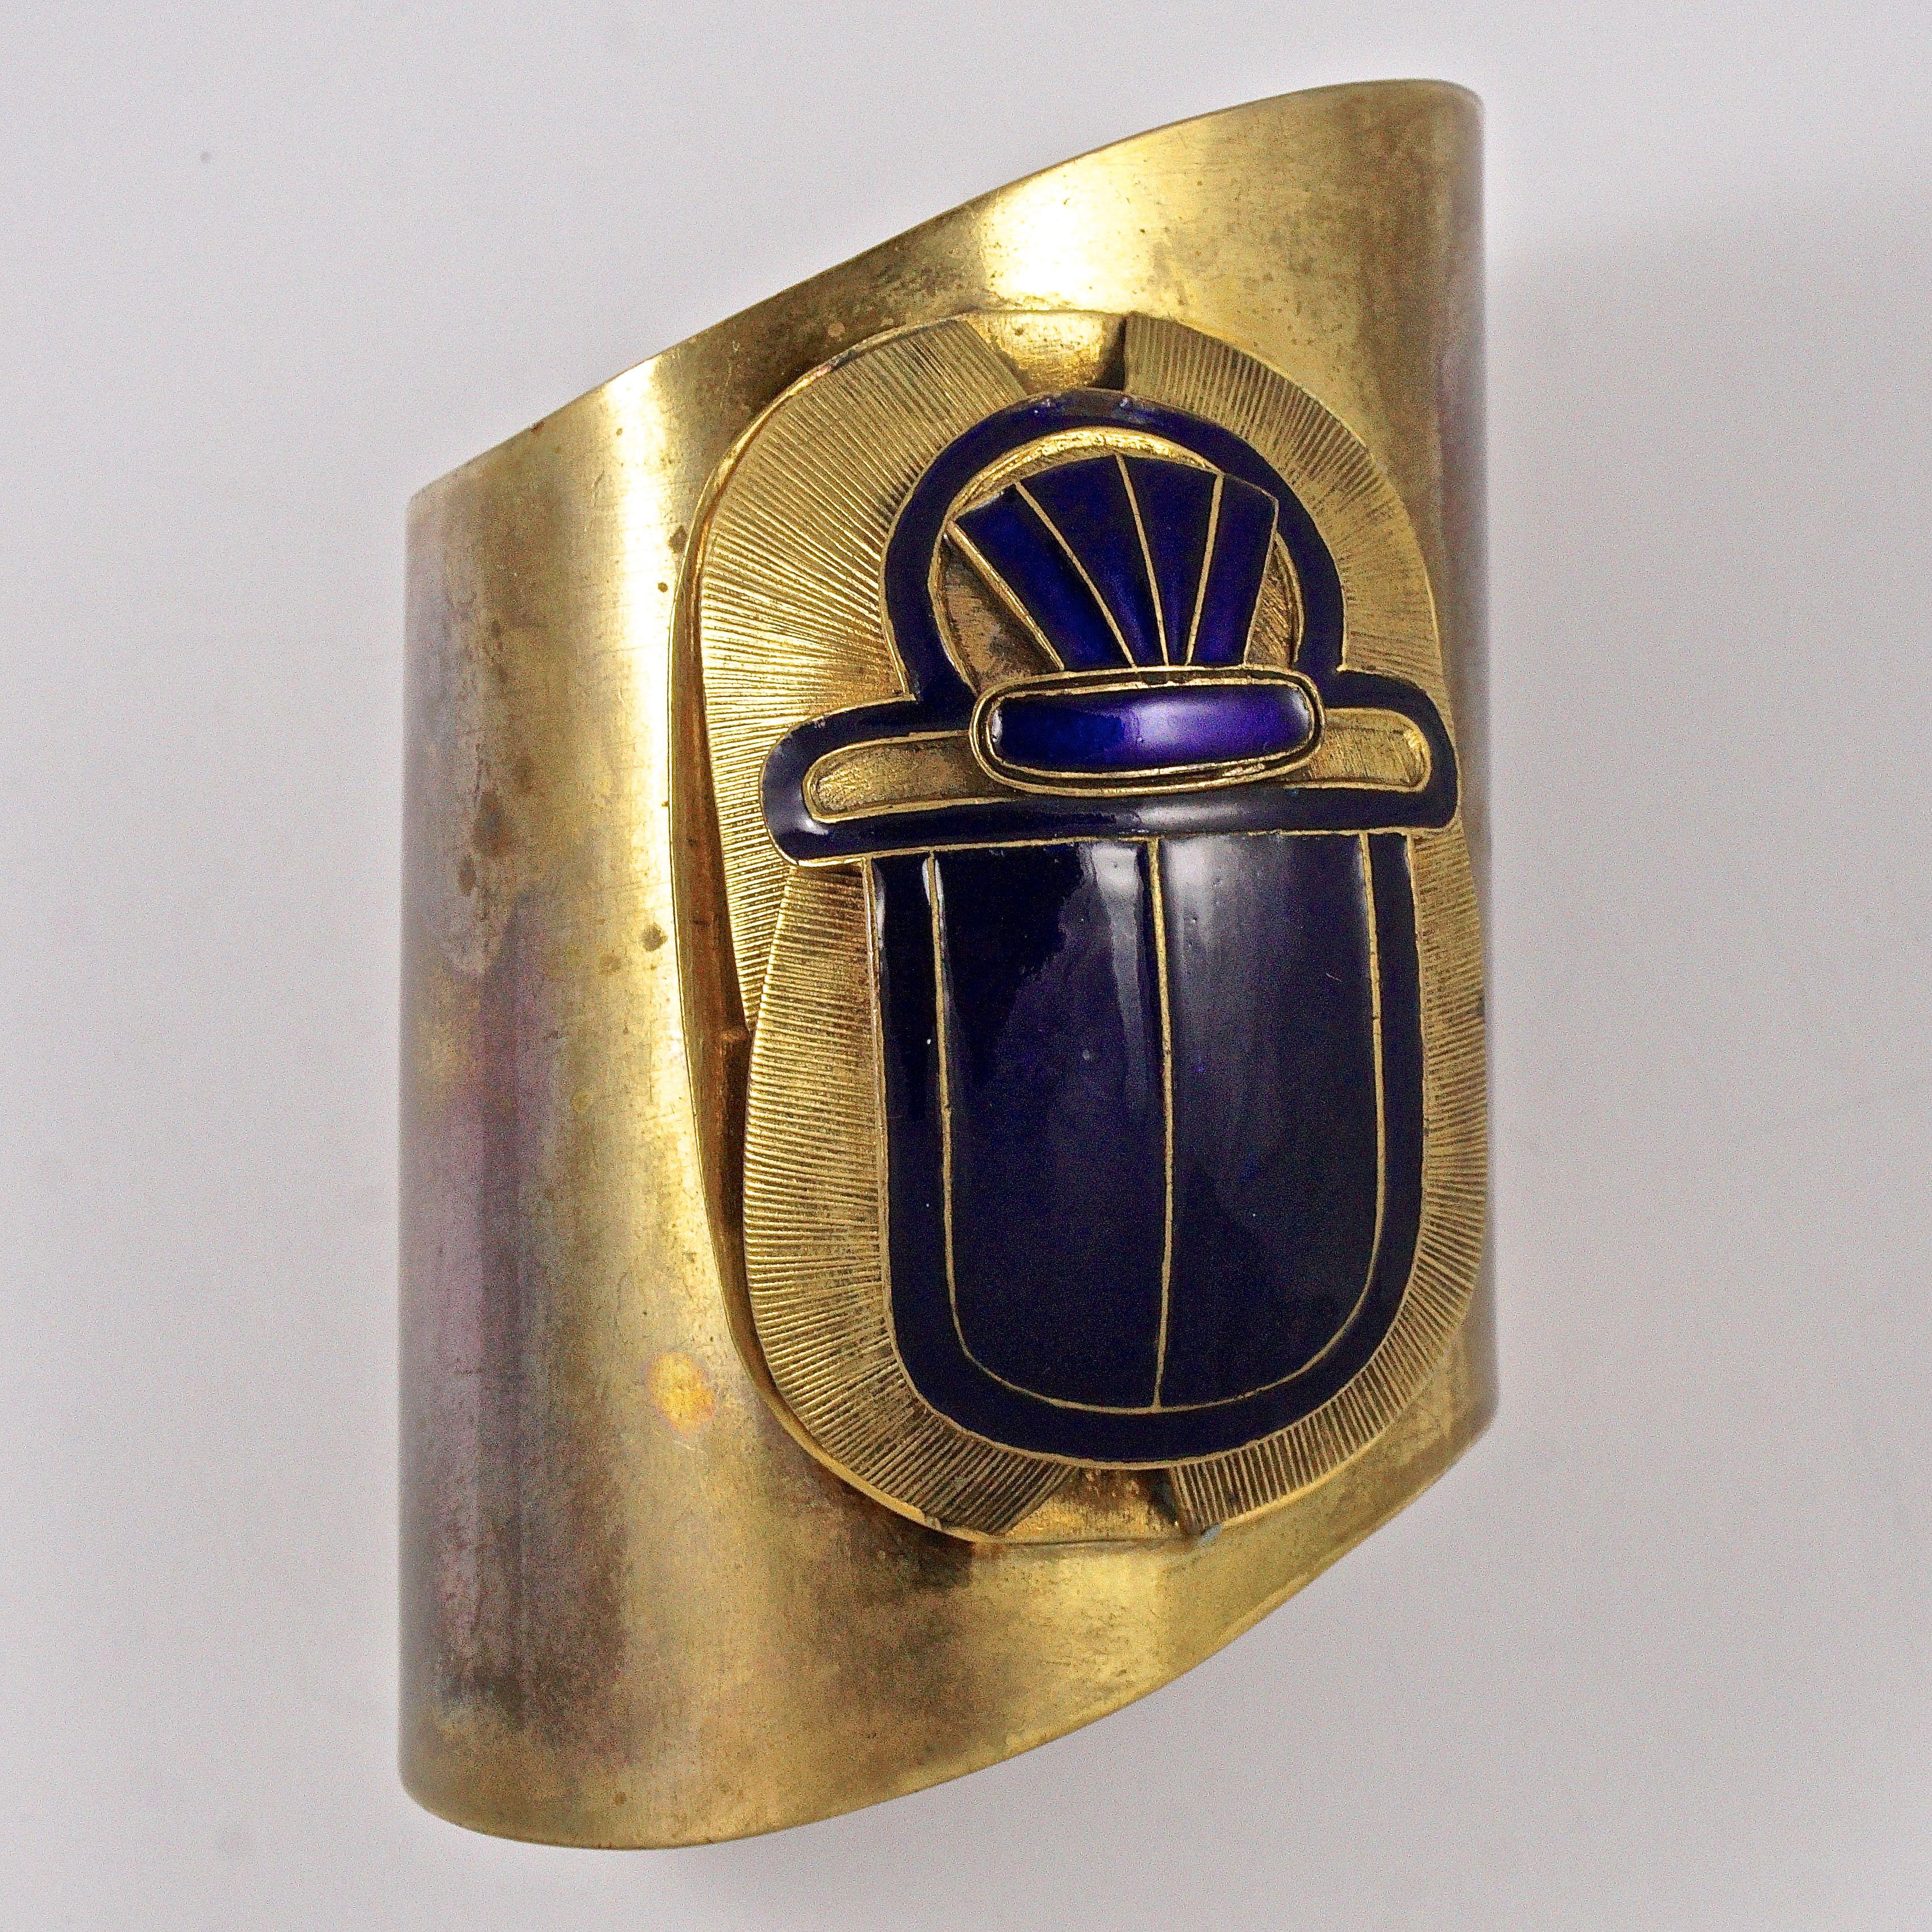 Egyptian Revival fabulous brass statement cuff bangle, featuring a large detailed blue enamel scarab. The width of the bangle is approximately 7.7cm / 3 inches tapering to 6.7cm / 2.63 inches, and the scarab is length 6.35cm / 2.5 inches. The brass